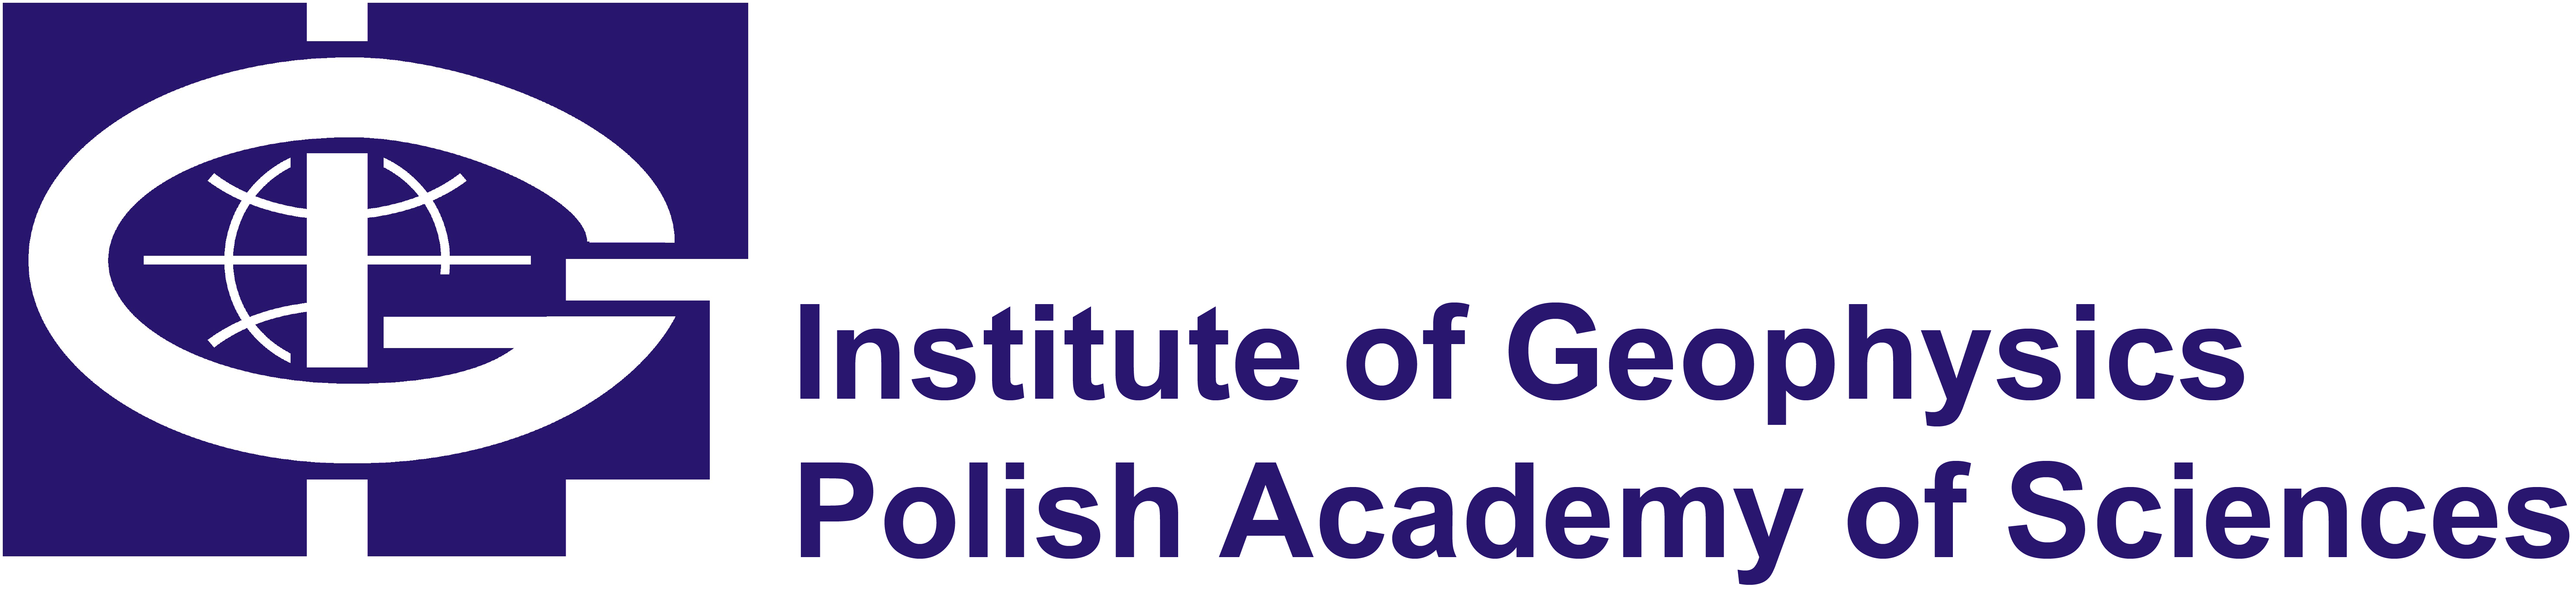 Institute of Geophysics and Polish Academy of Sciences